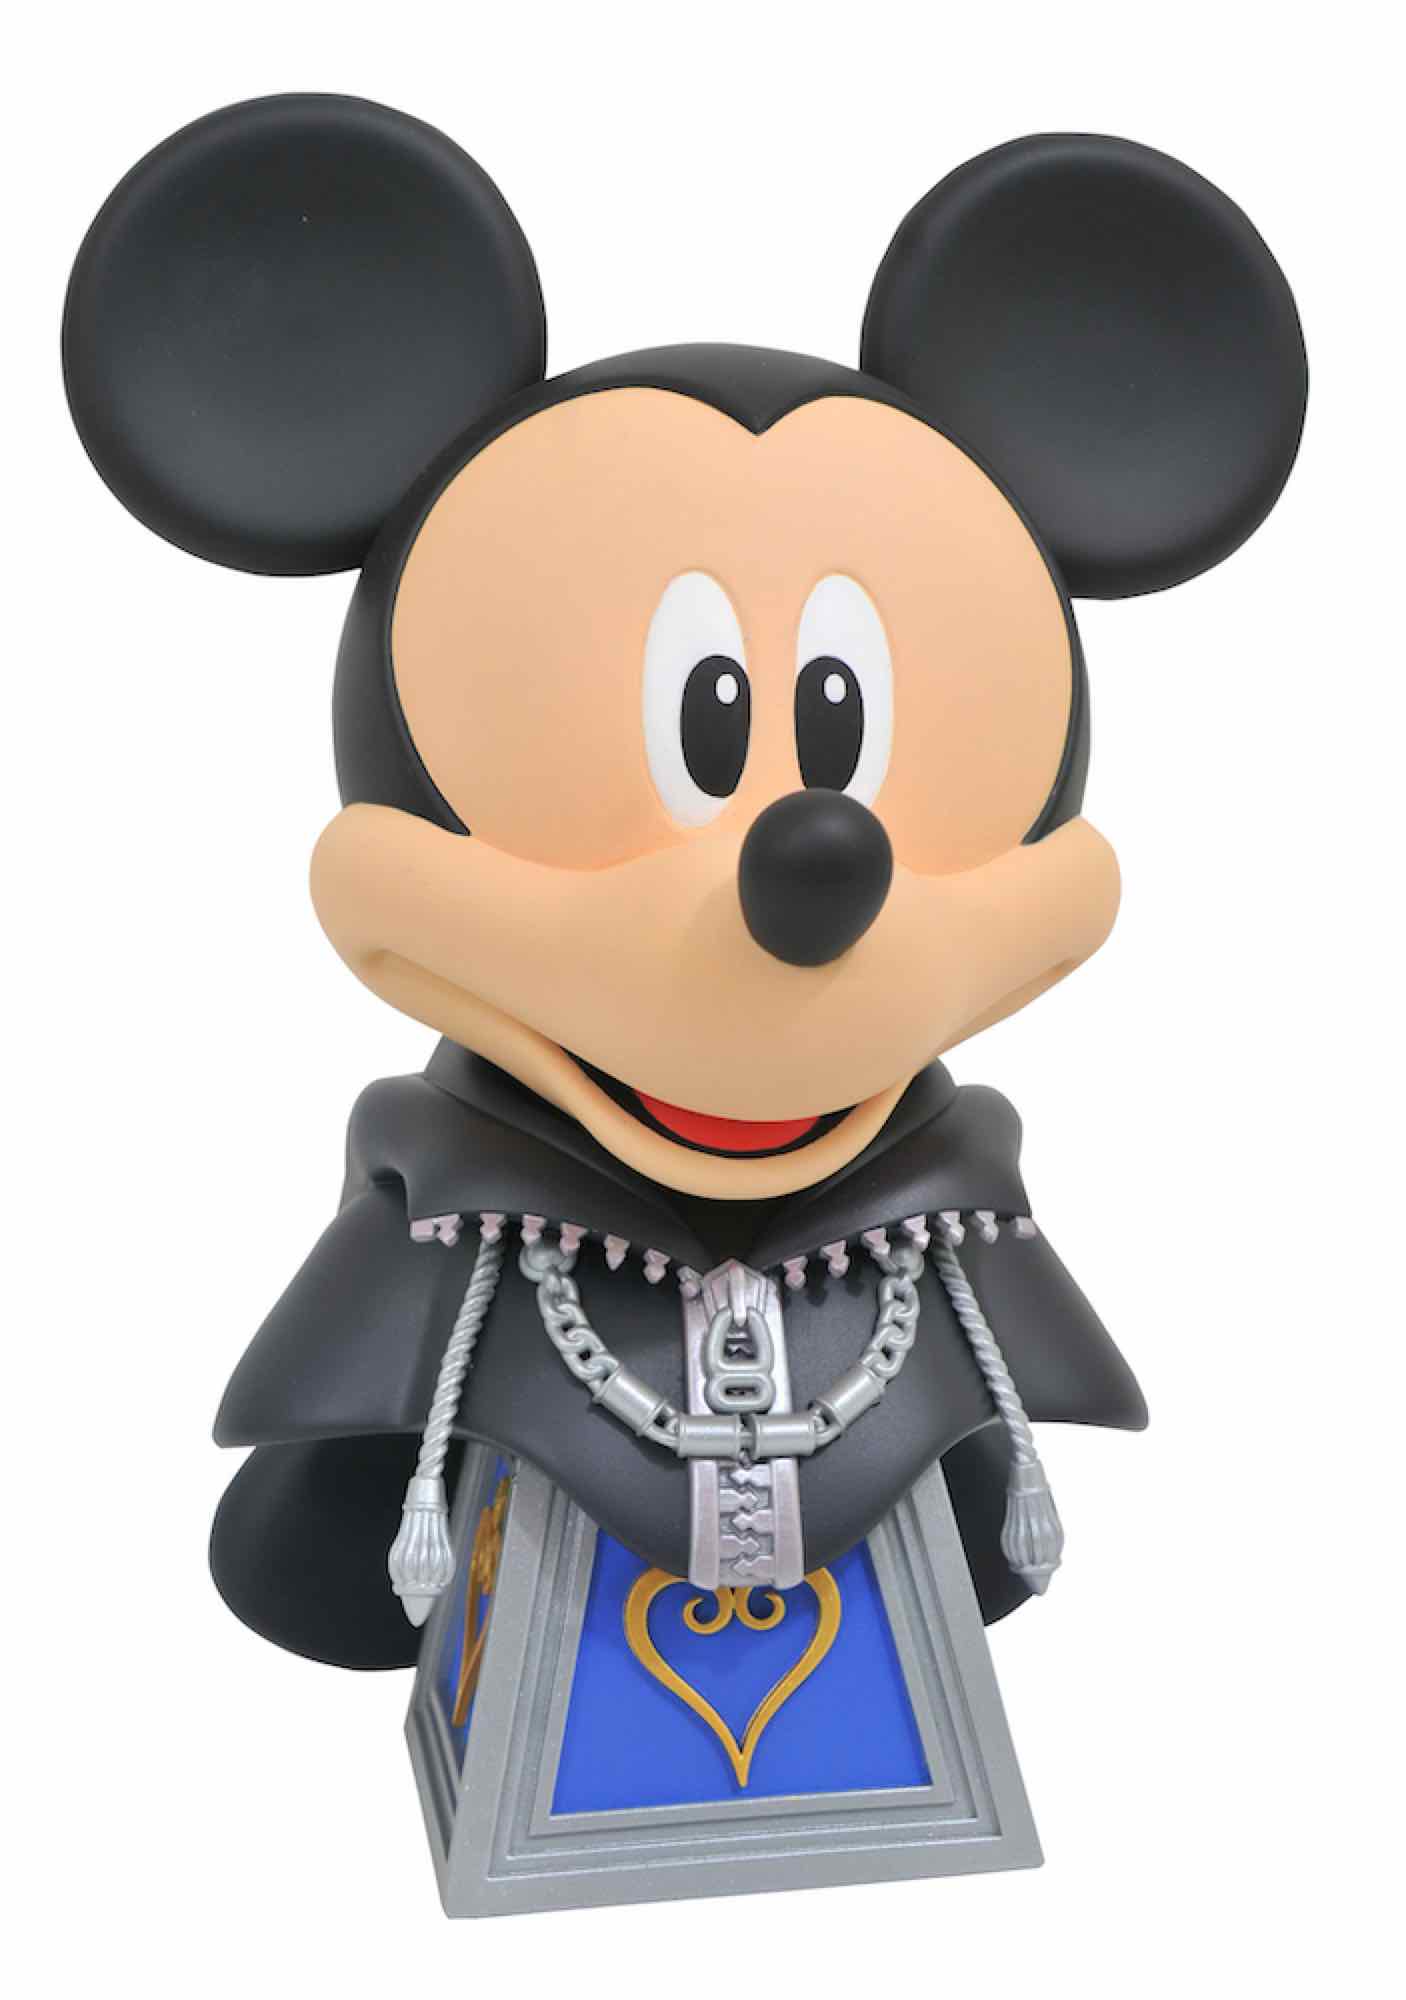 MICKEY MOUSE BUSTO RESINA 25 CM 1/2 SCALE LEGENDS IN 3D VIDEO GAME KINGDOM HEARTS